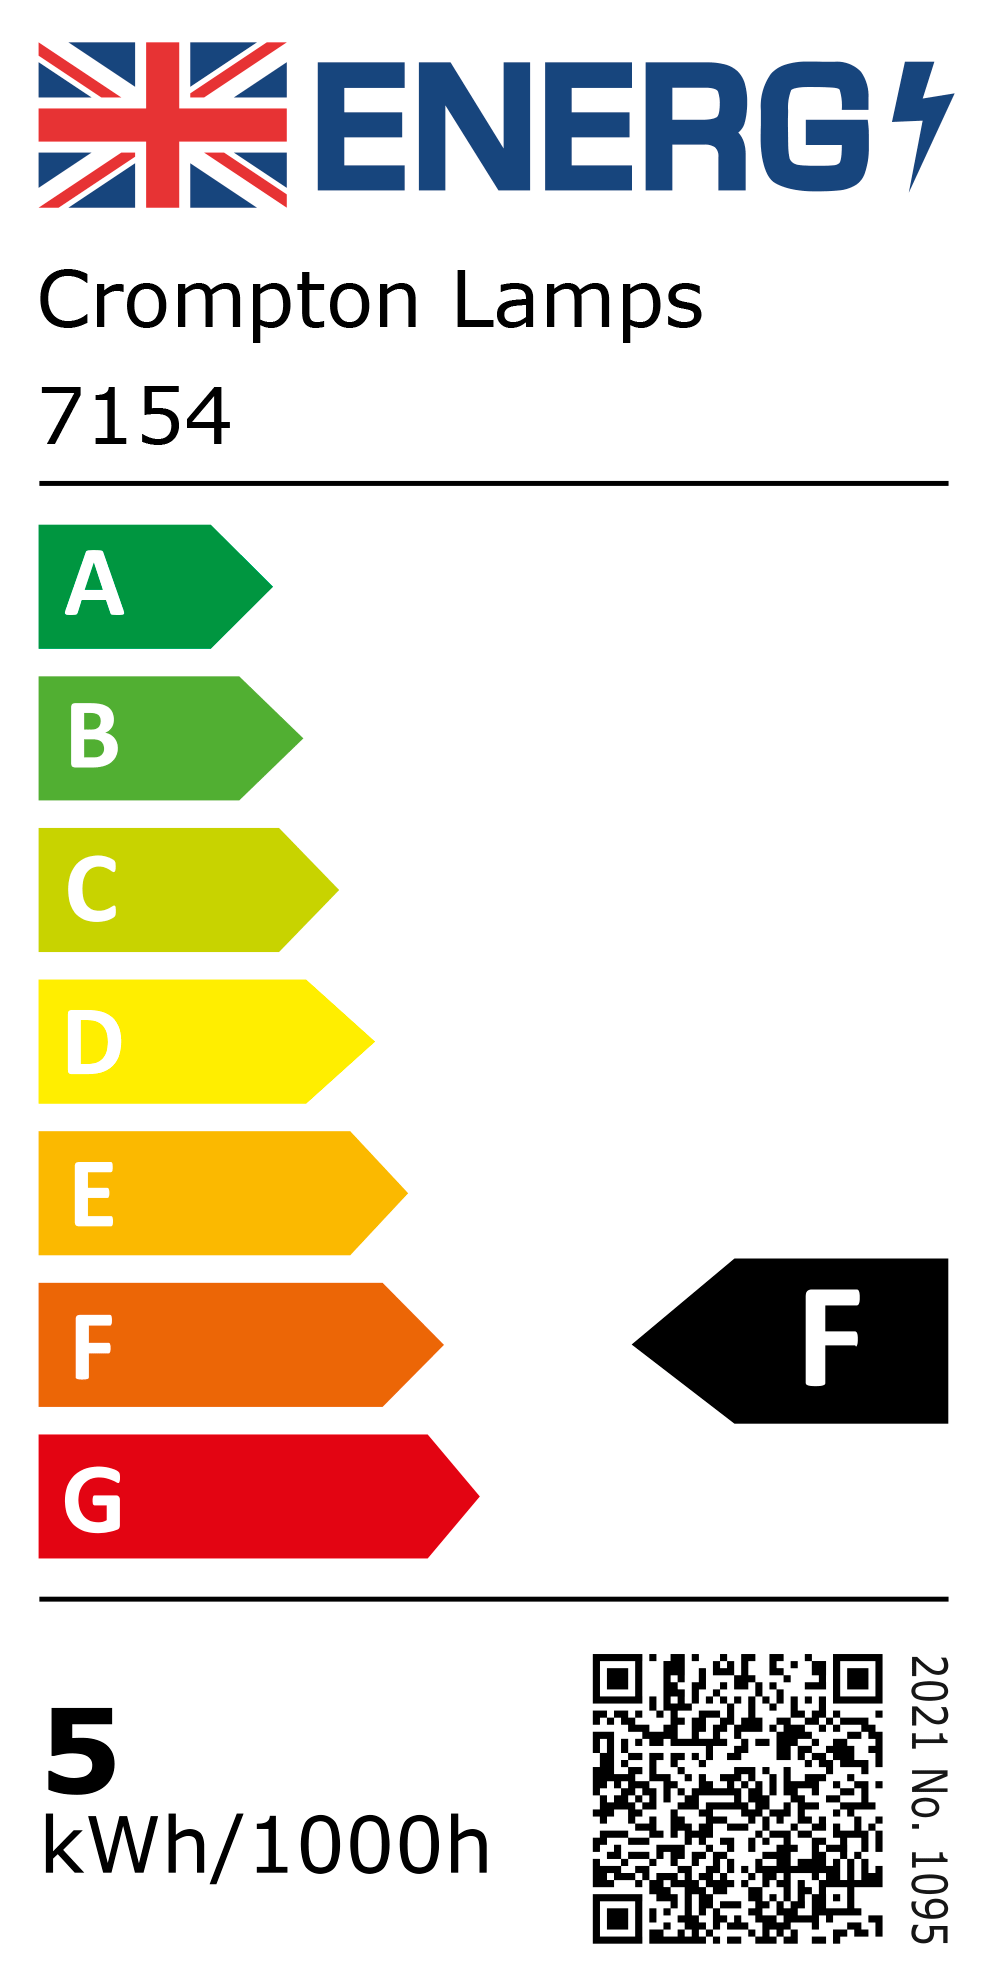 New 2021 Energy Rating Label: Stock Code 7154